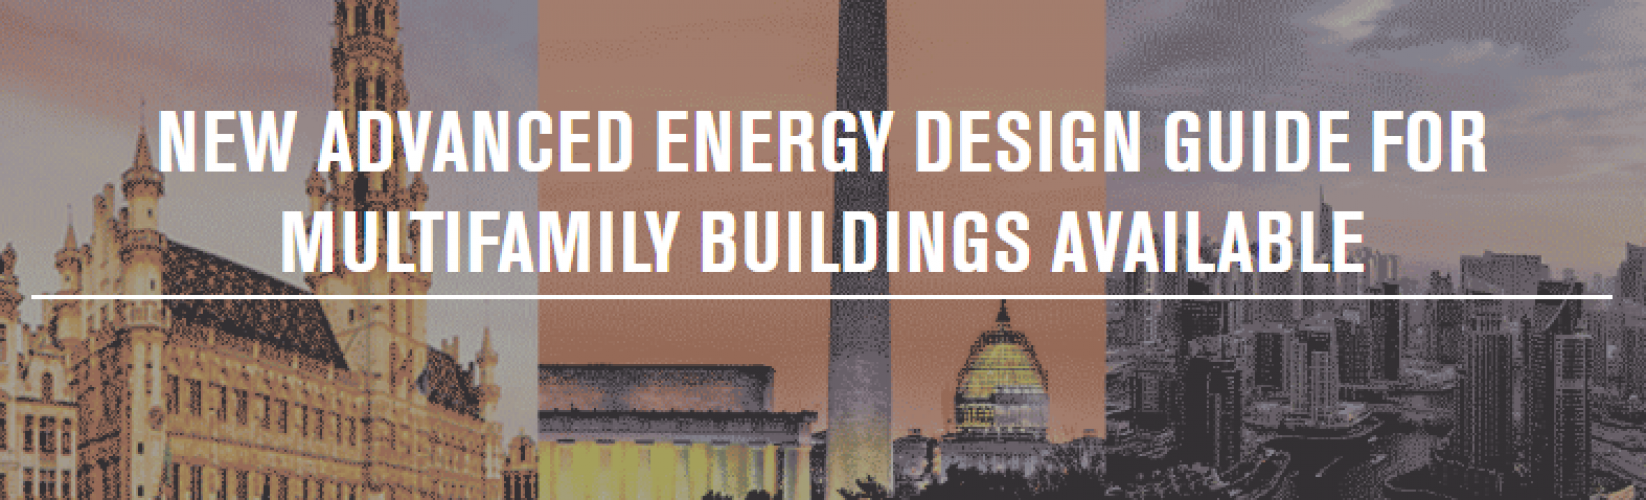 New Advanced Energy Design Guide for Multifamily Buildings Available